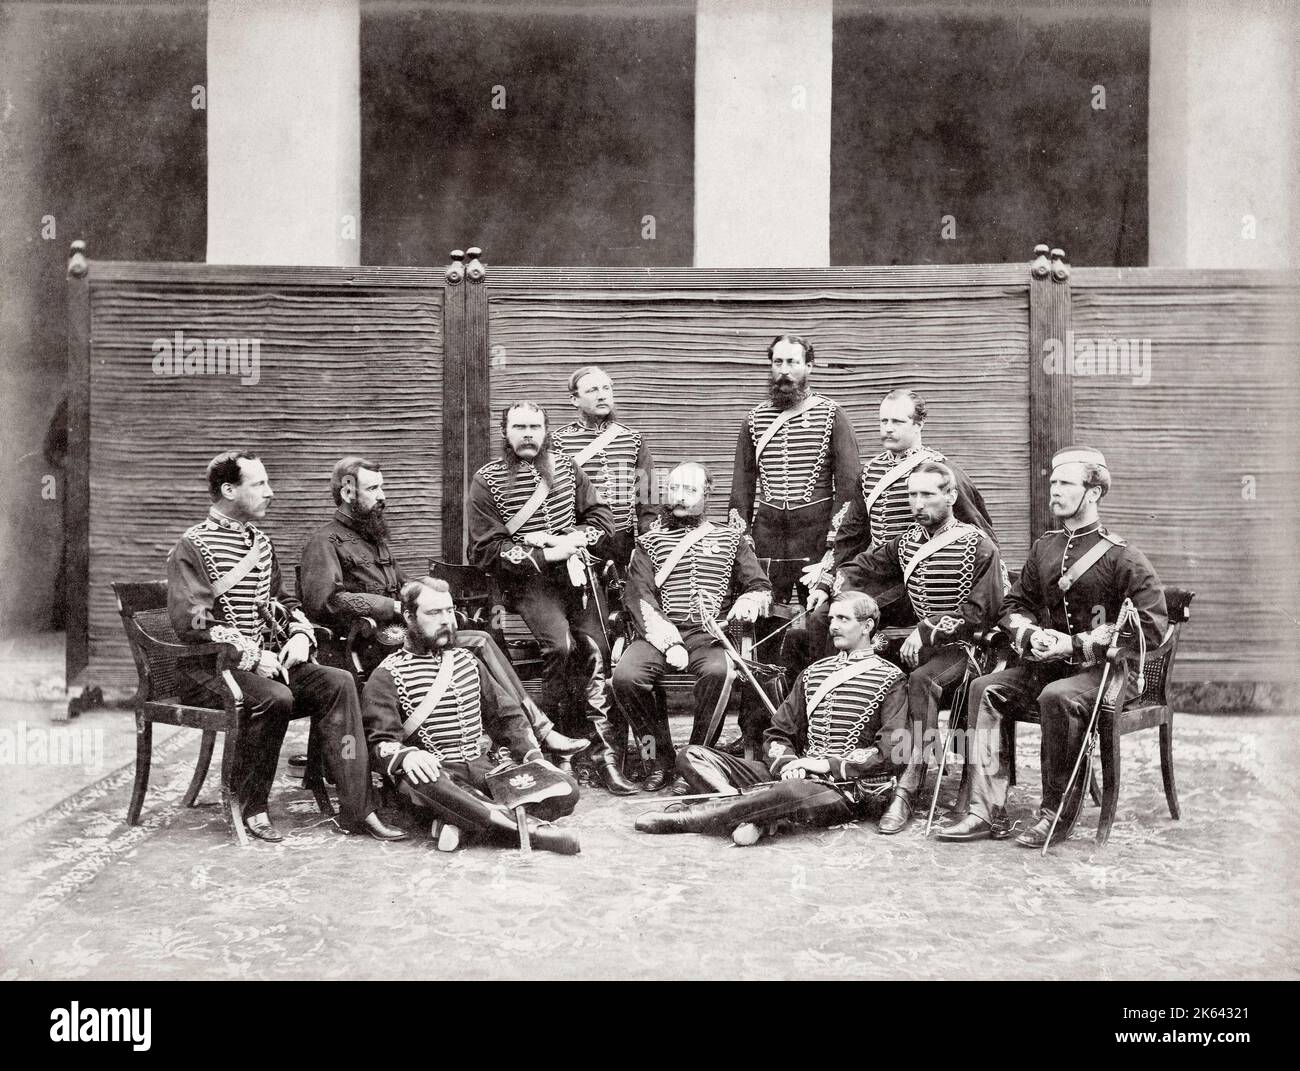 Vintage 19th century photograph - British army in India - officers of the Royal horse Artillery regiment, Peshawar, 1866 Stock Photo